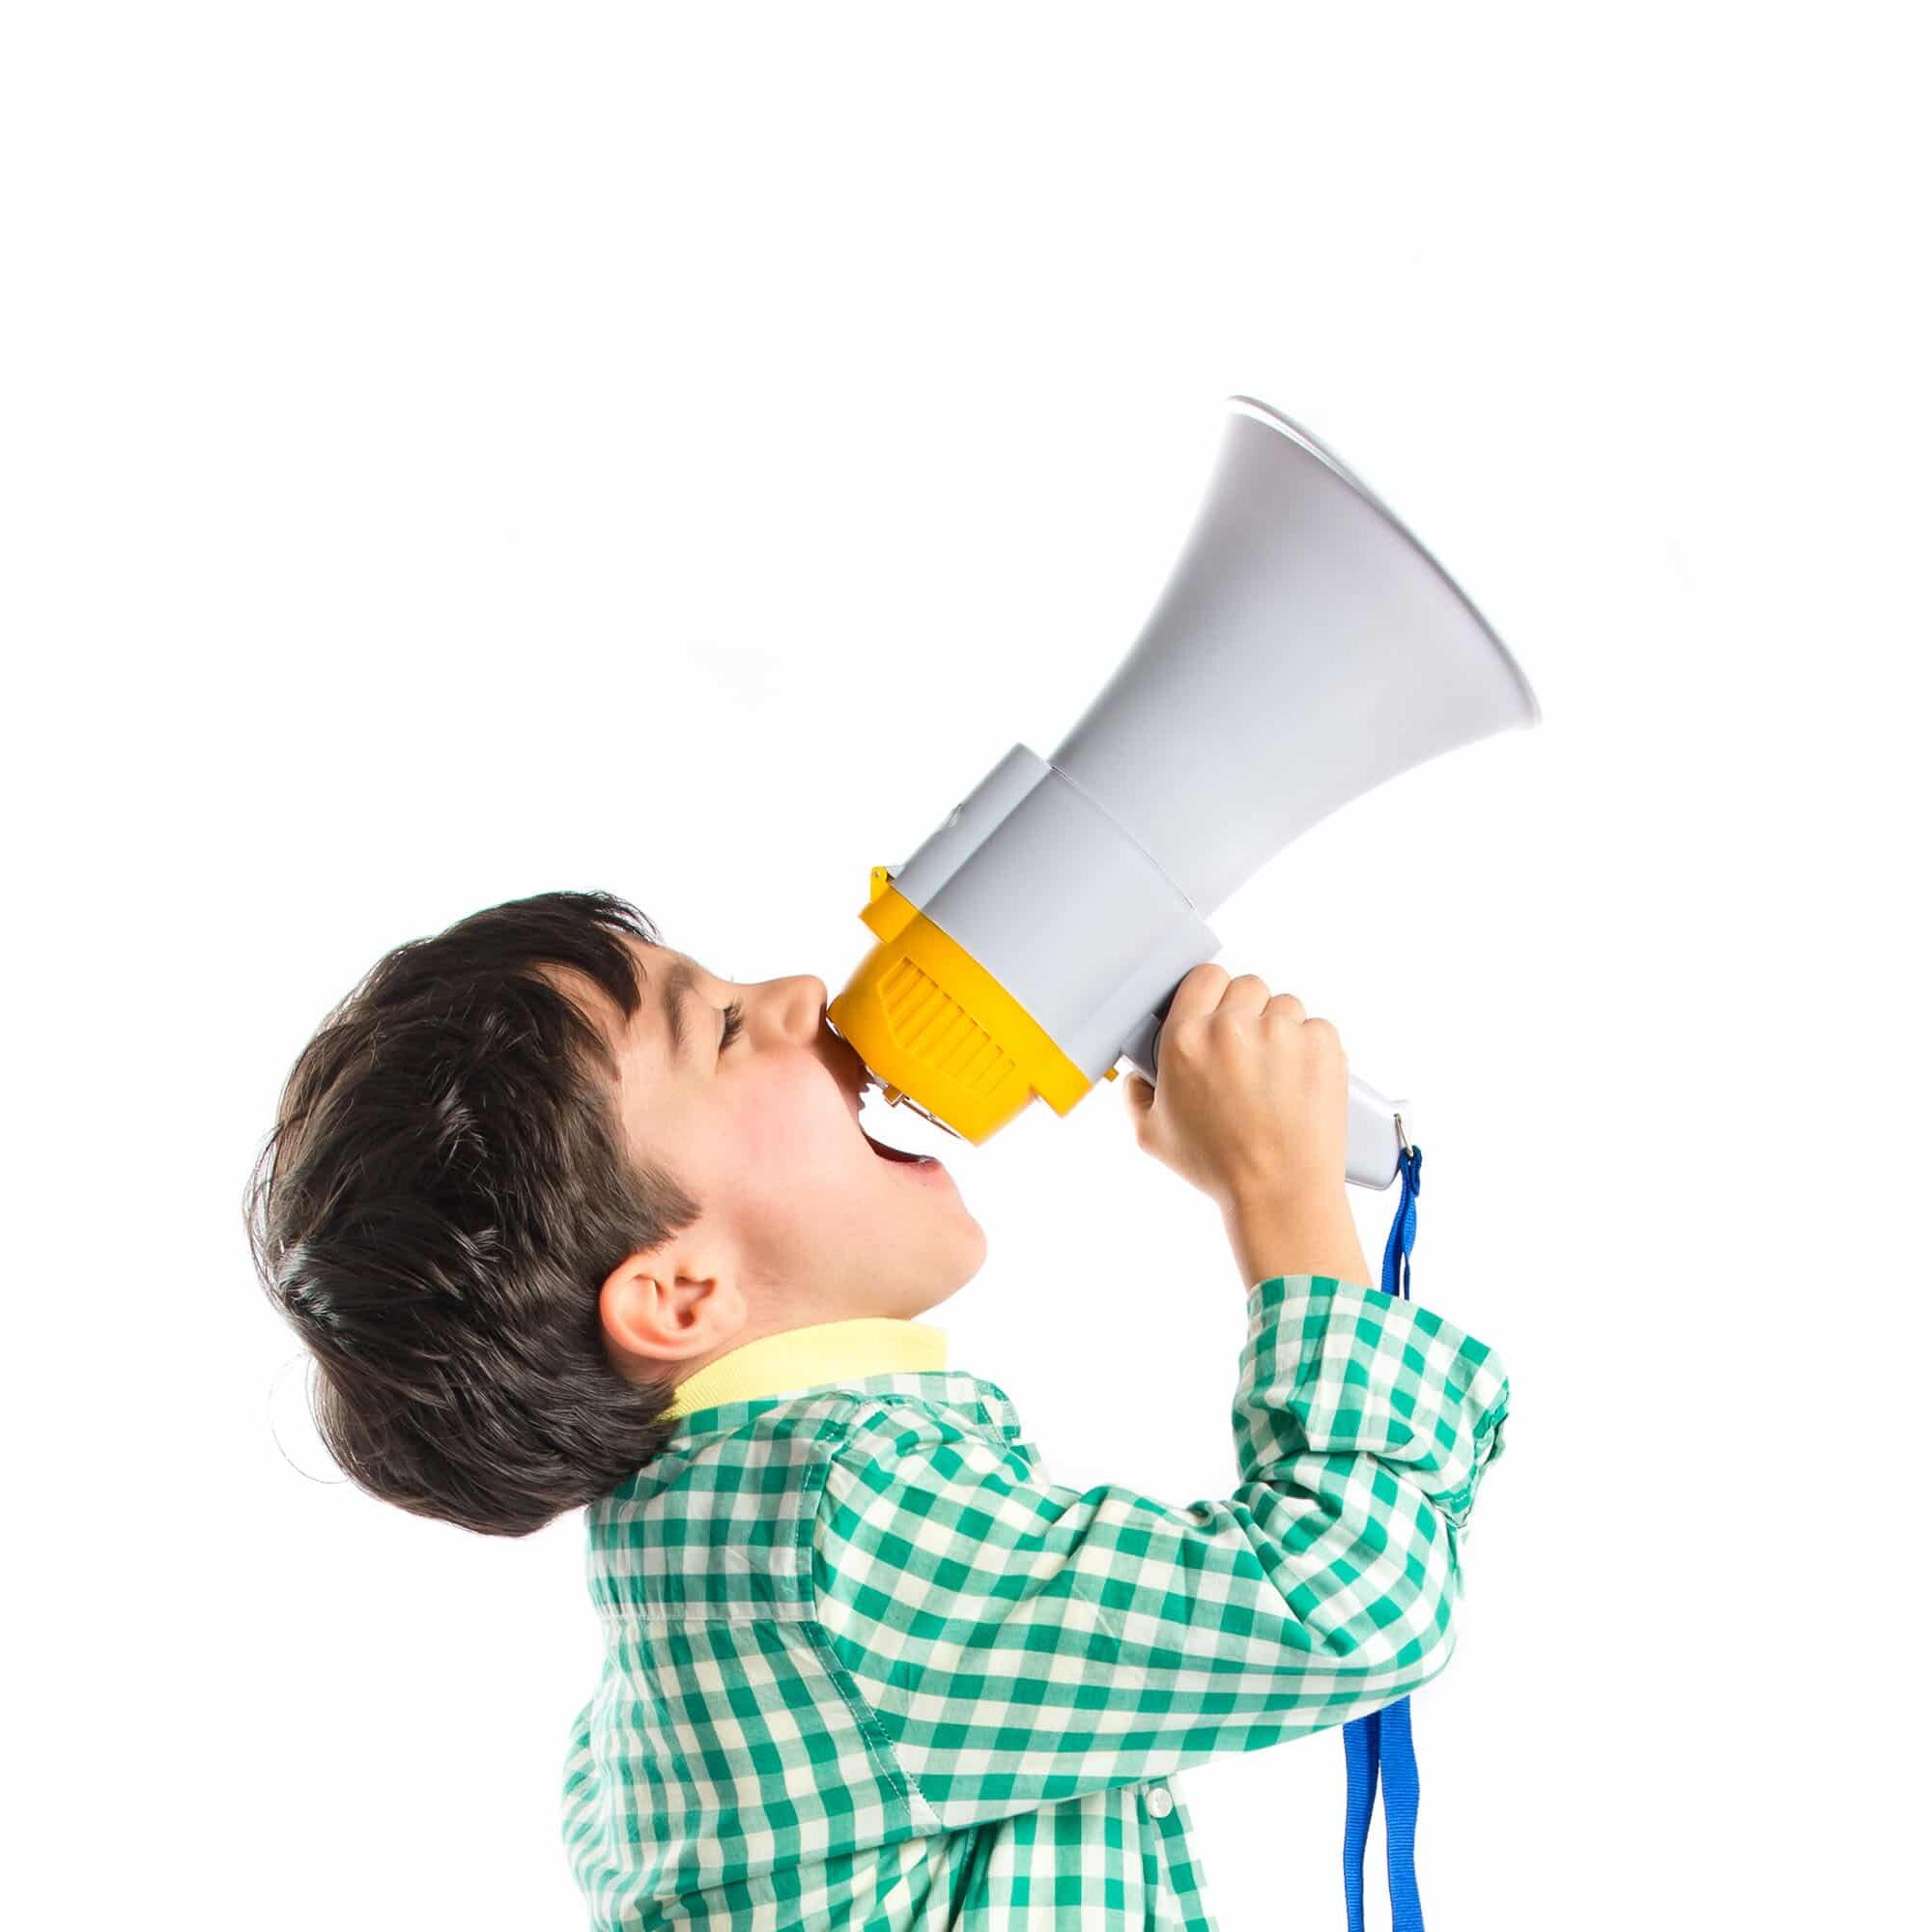 Kid shouting by megaphone over white background